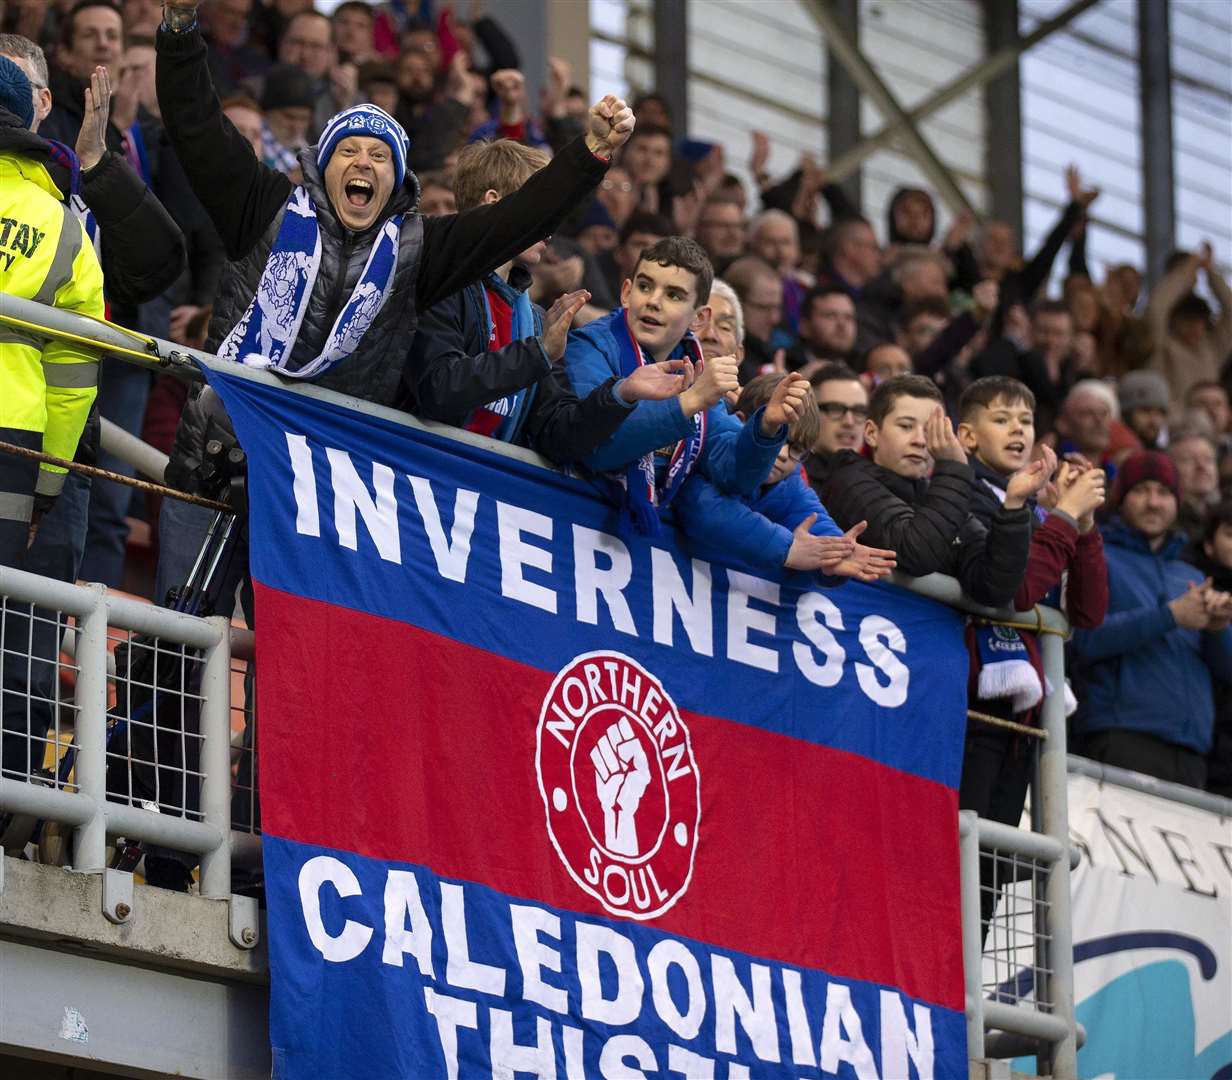 Some of the delighted Inverness fans following the quarter final win at Dundee United.